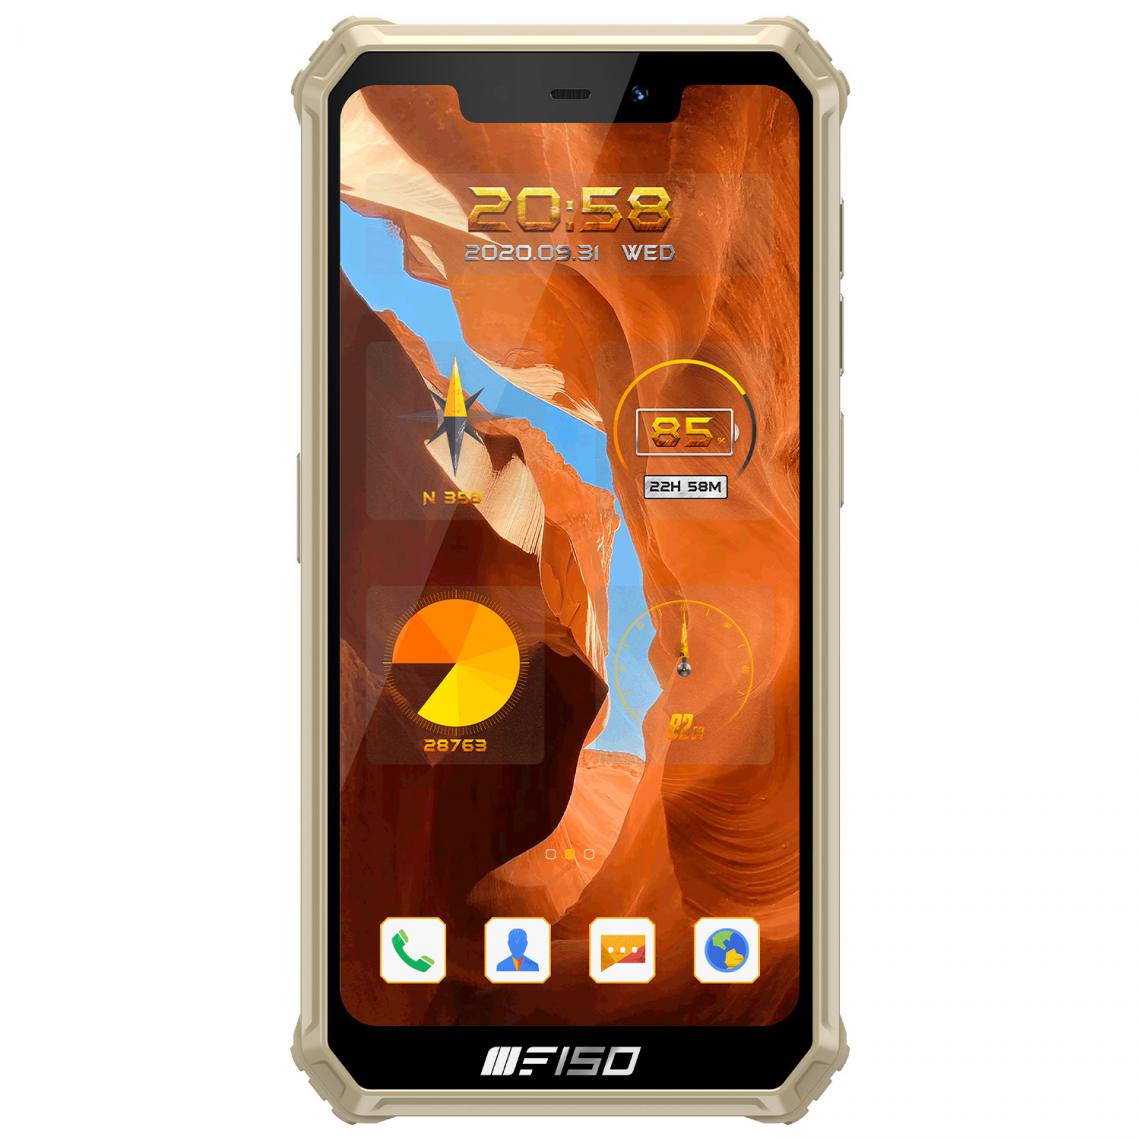 Oukitel - F150B2021 - Smartphone Android